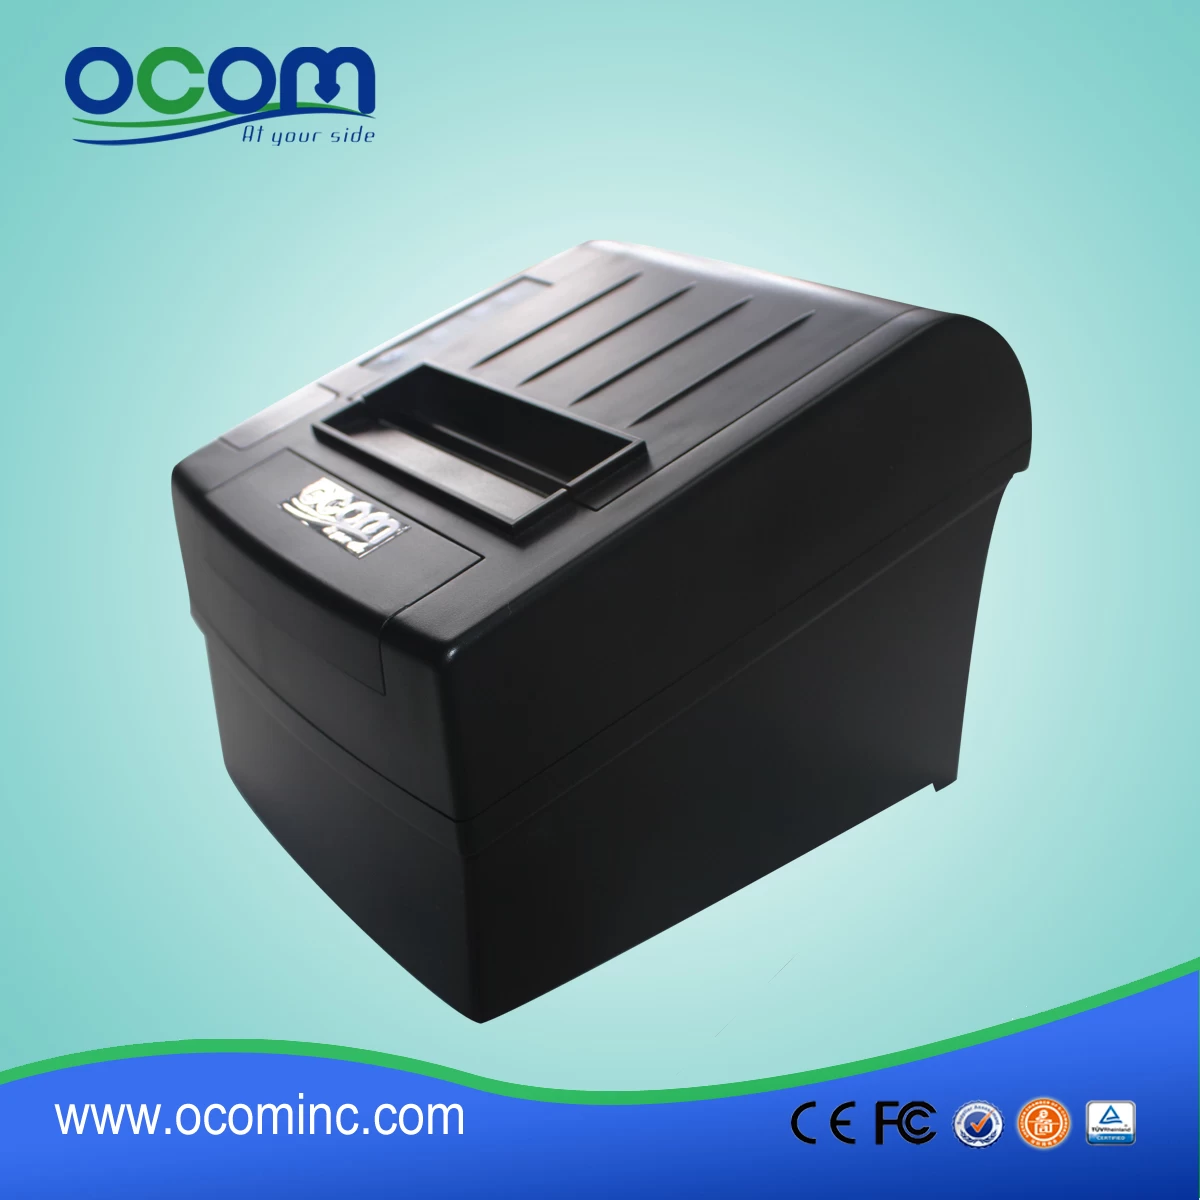 3 inch Android 1D and QR code Thermal Printer--OCPP-806